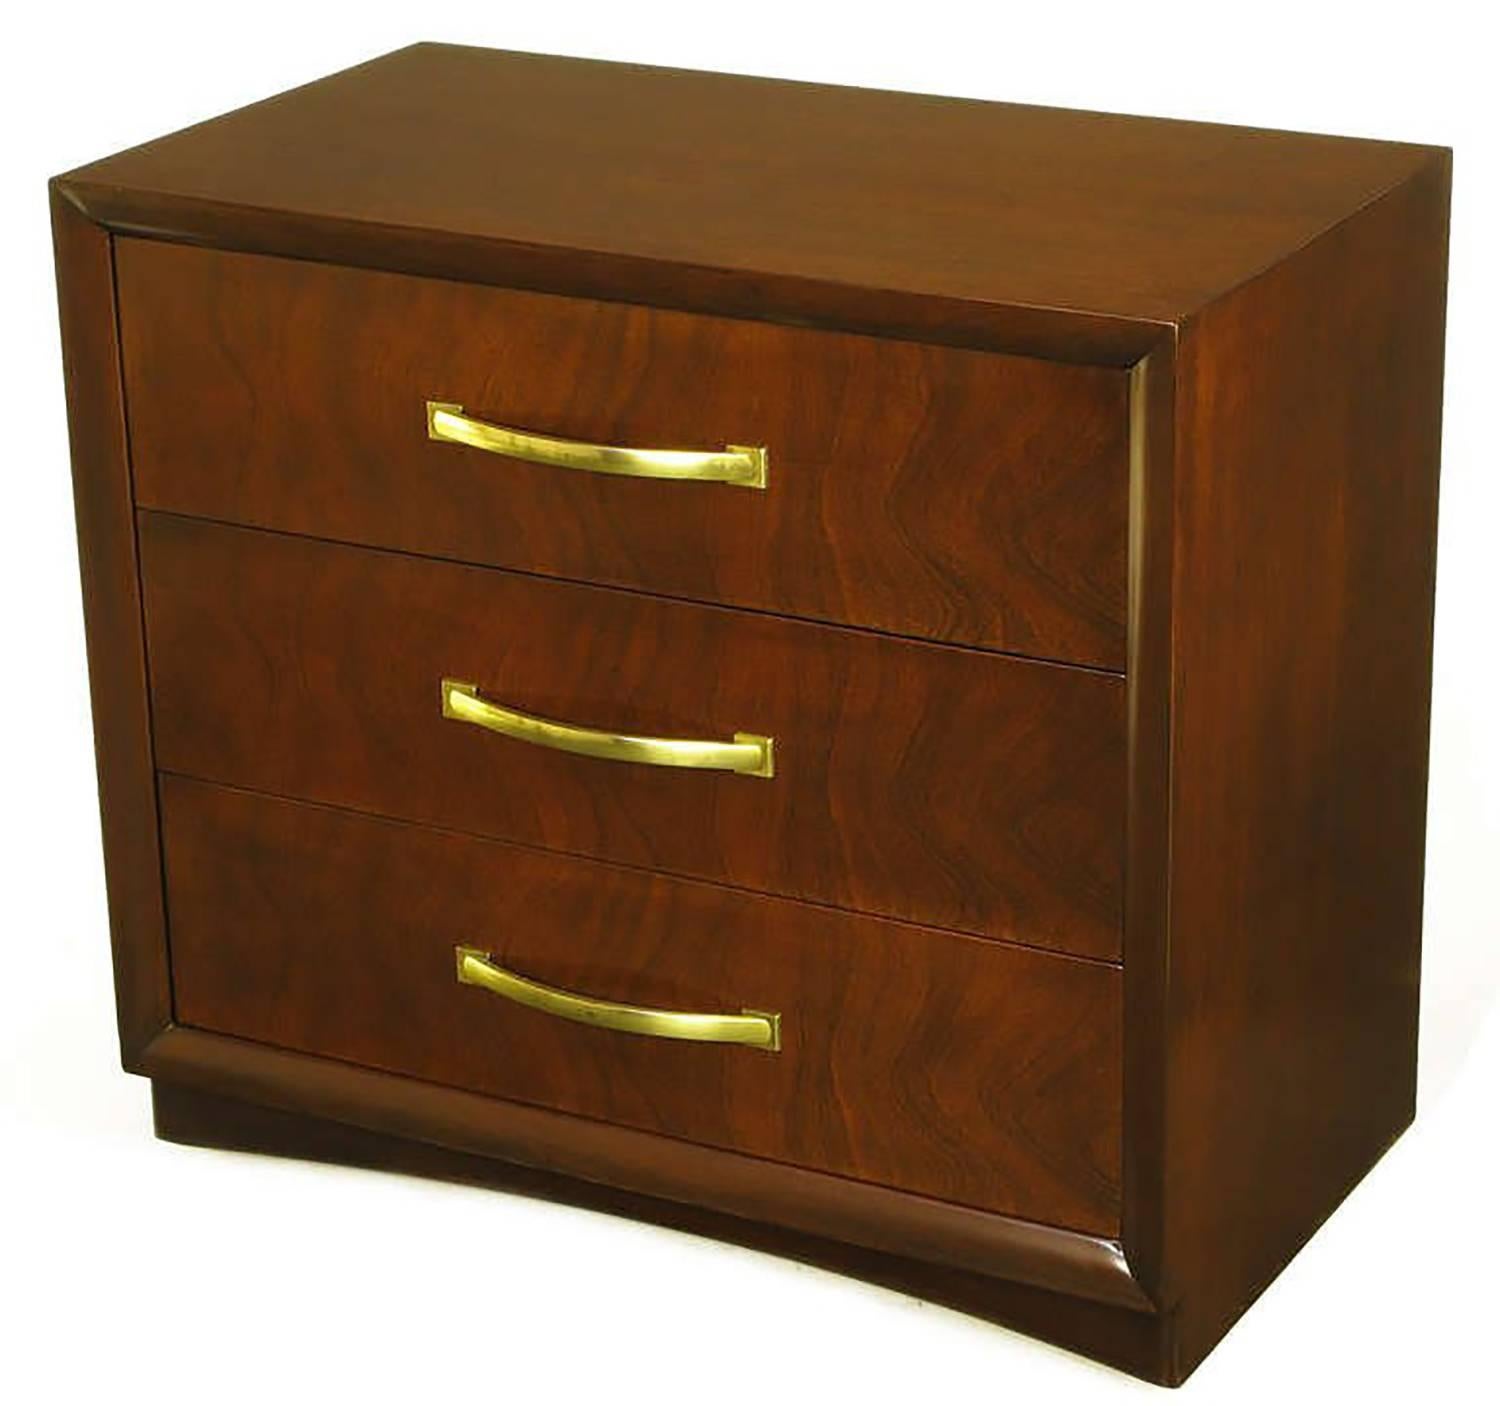 Widdicomb modern original Art Deco three-drawer commode with figured mahogany drawer fronts. Picture frame style casing with recessed curved front plinth base. Large brushed brass curved single pulls for each drawer.